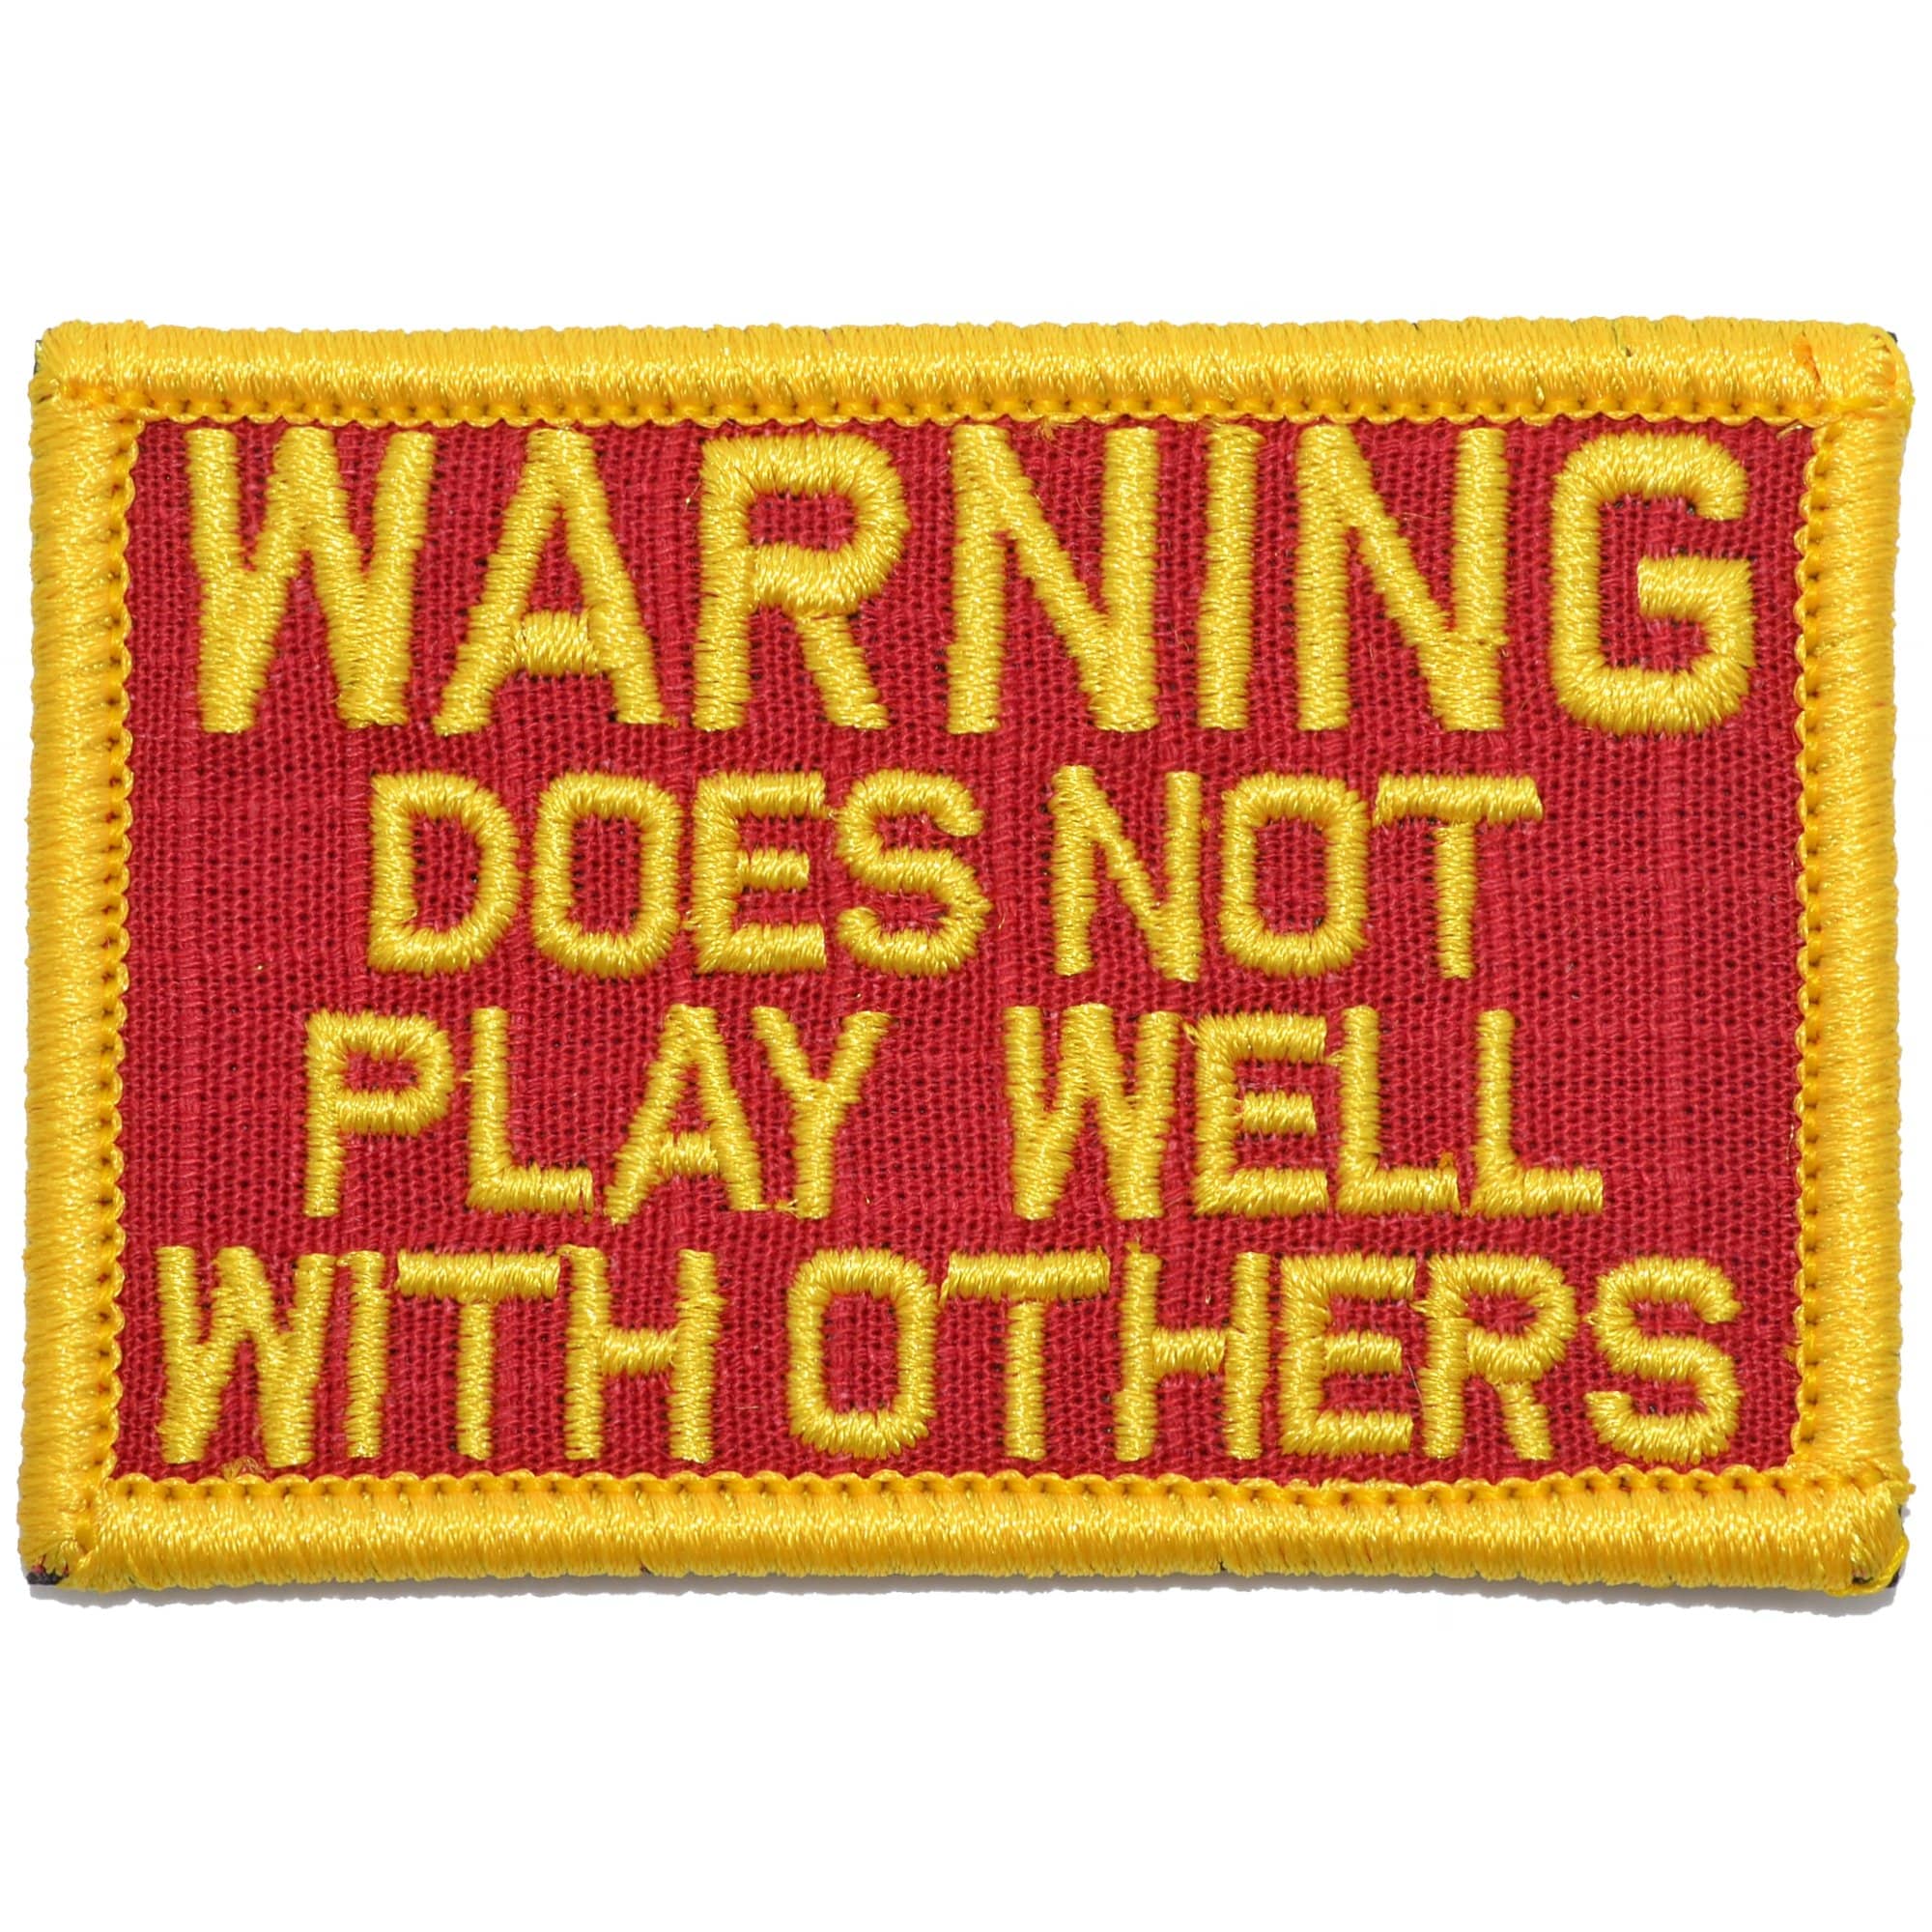 Tactical Gear Junkie Patches Red w/ Yellow WARNING: Does Not Play Well With Others - 2x3 Patch